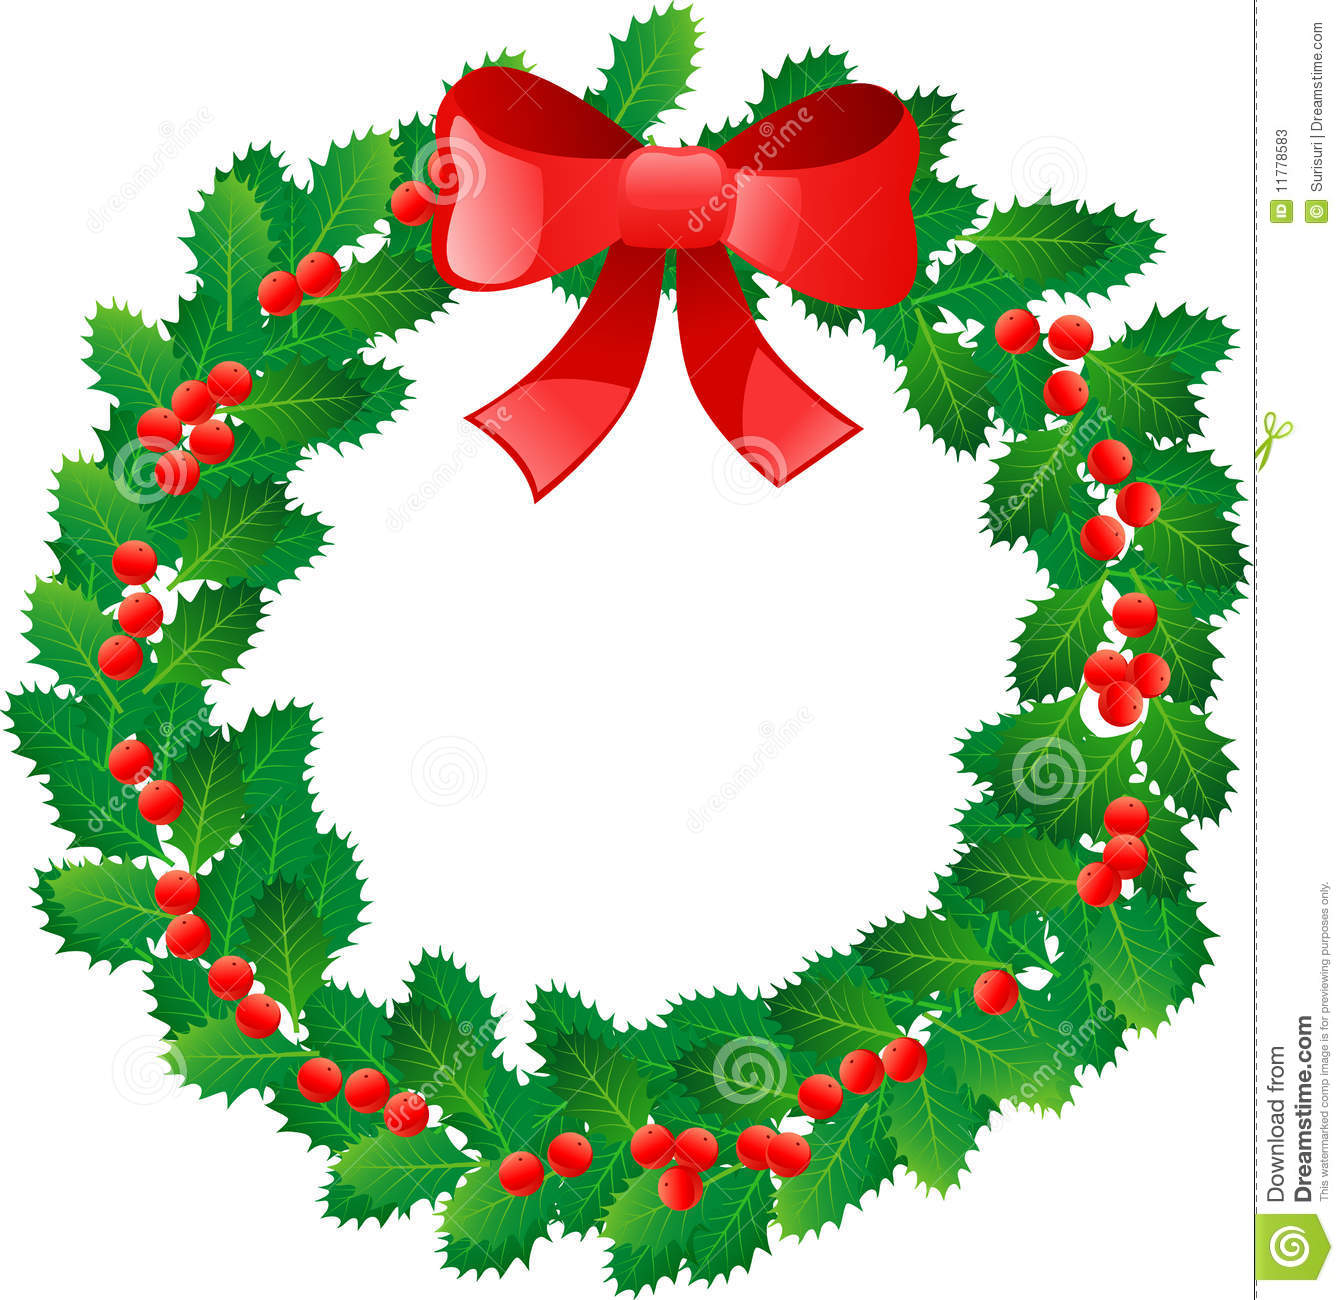 Beautiful Christmas Wreath With Red Berries Isolated On White